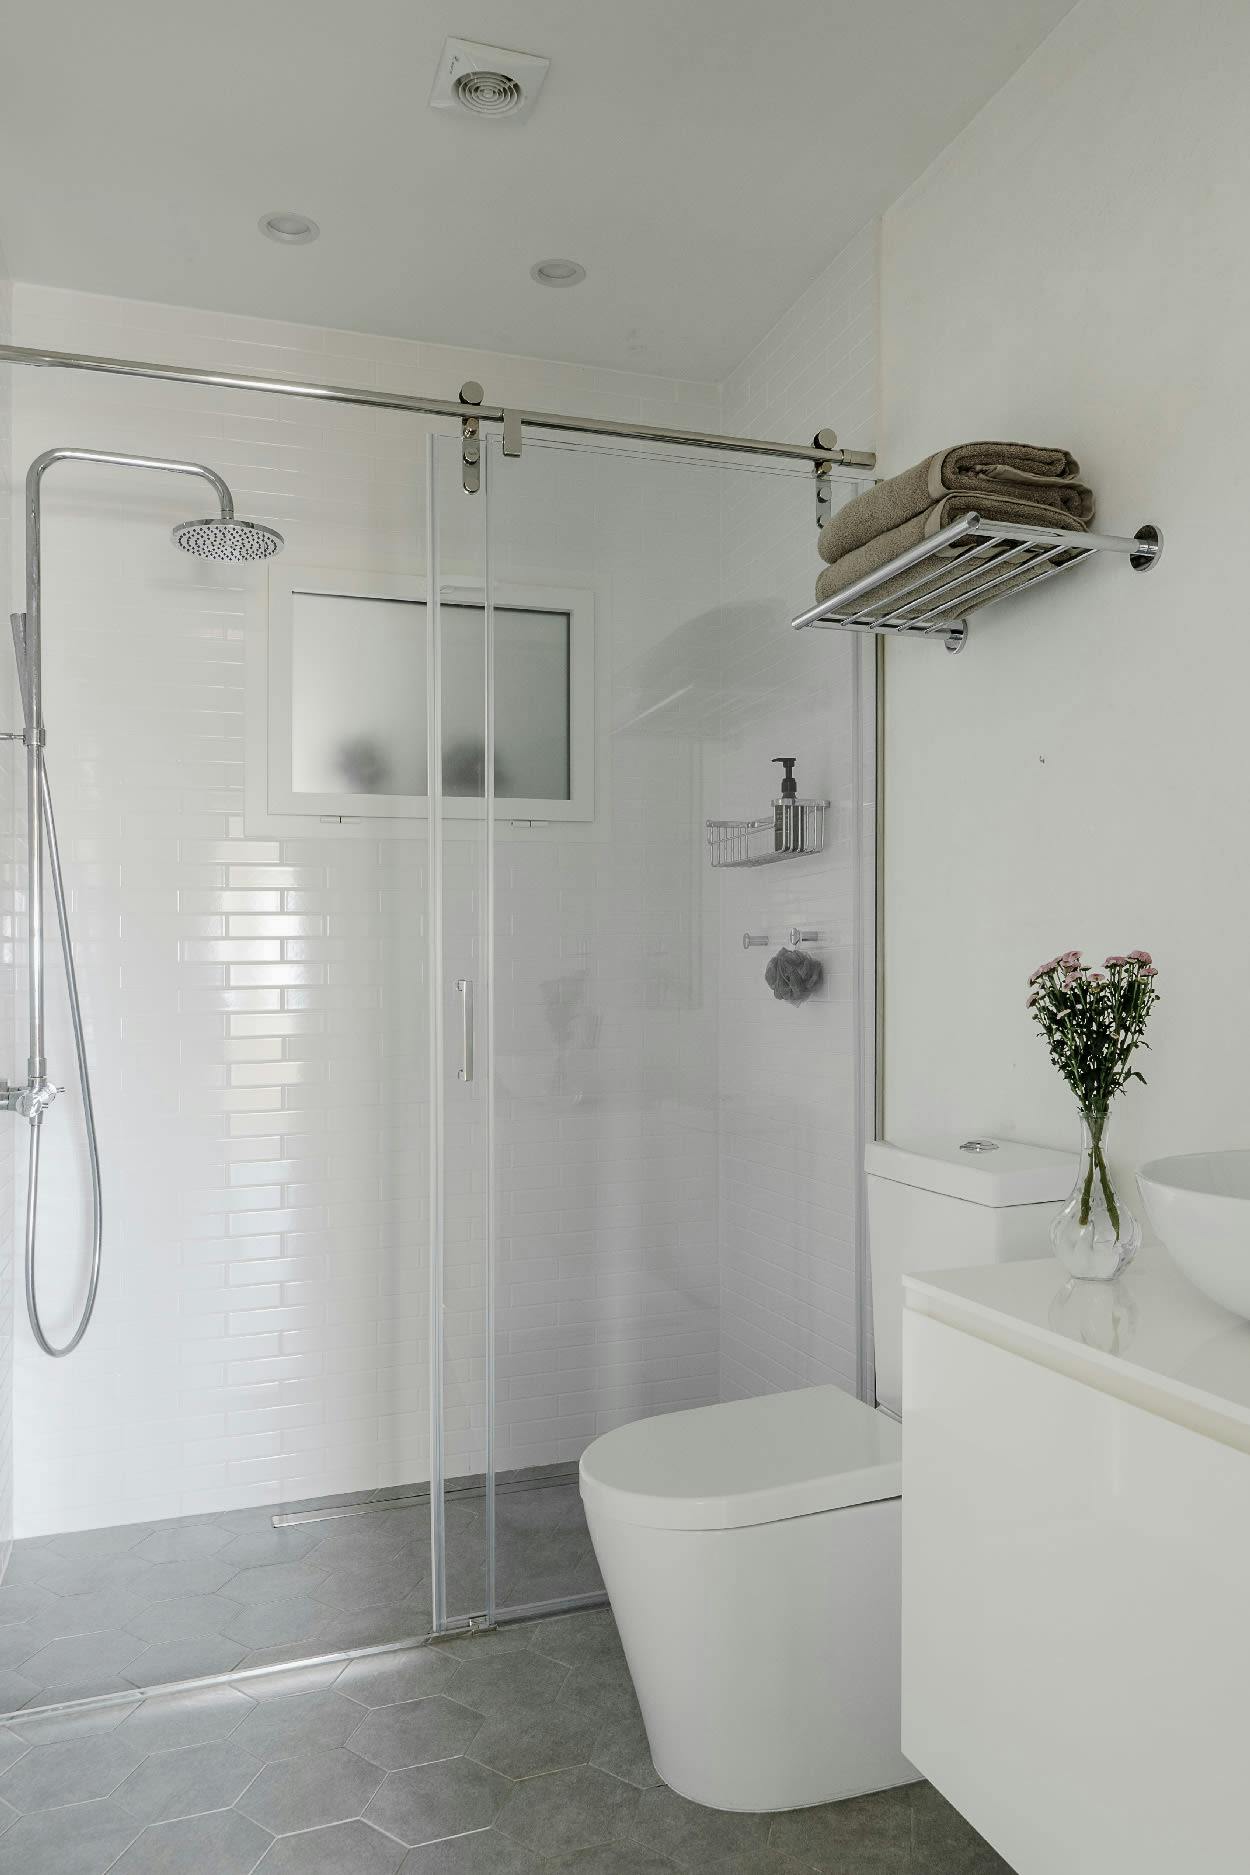 The image features a clean, white bathroom with a white bathtub, toilet, and shower. There is a vase with flowers placed on the counter next to the bathtub, and a sink is also present in the bathroom.